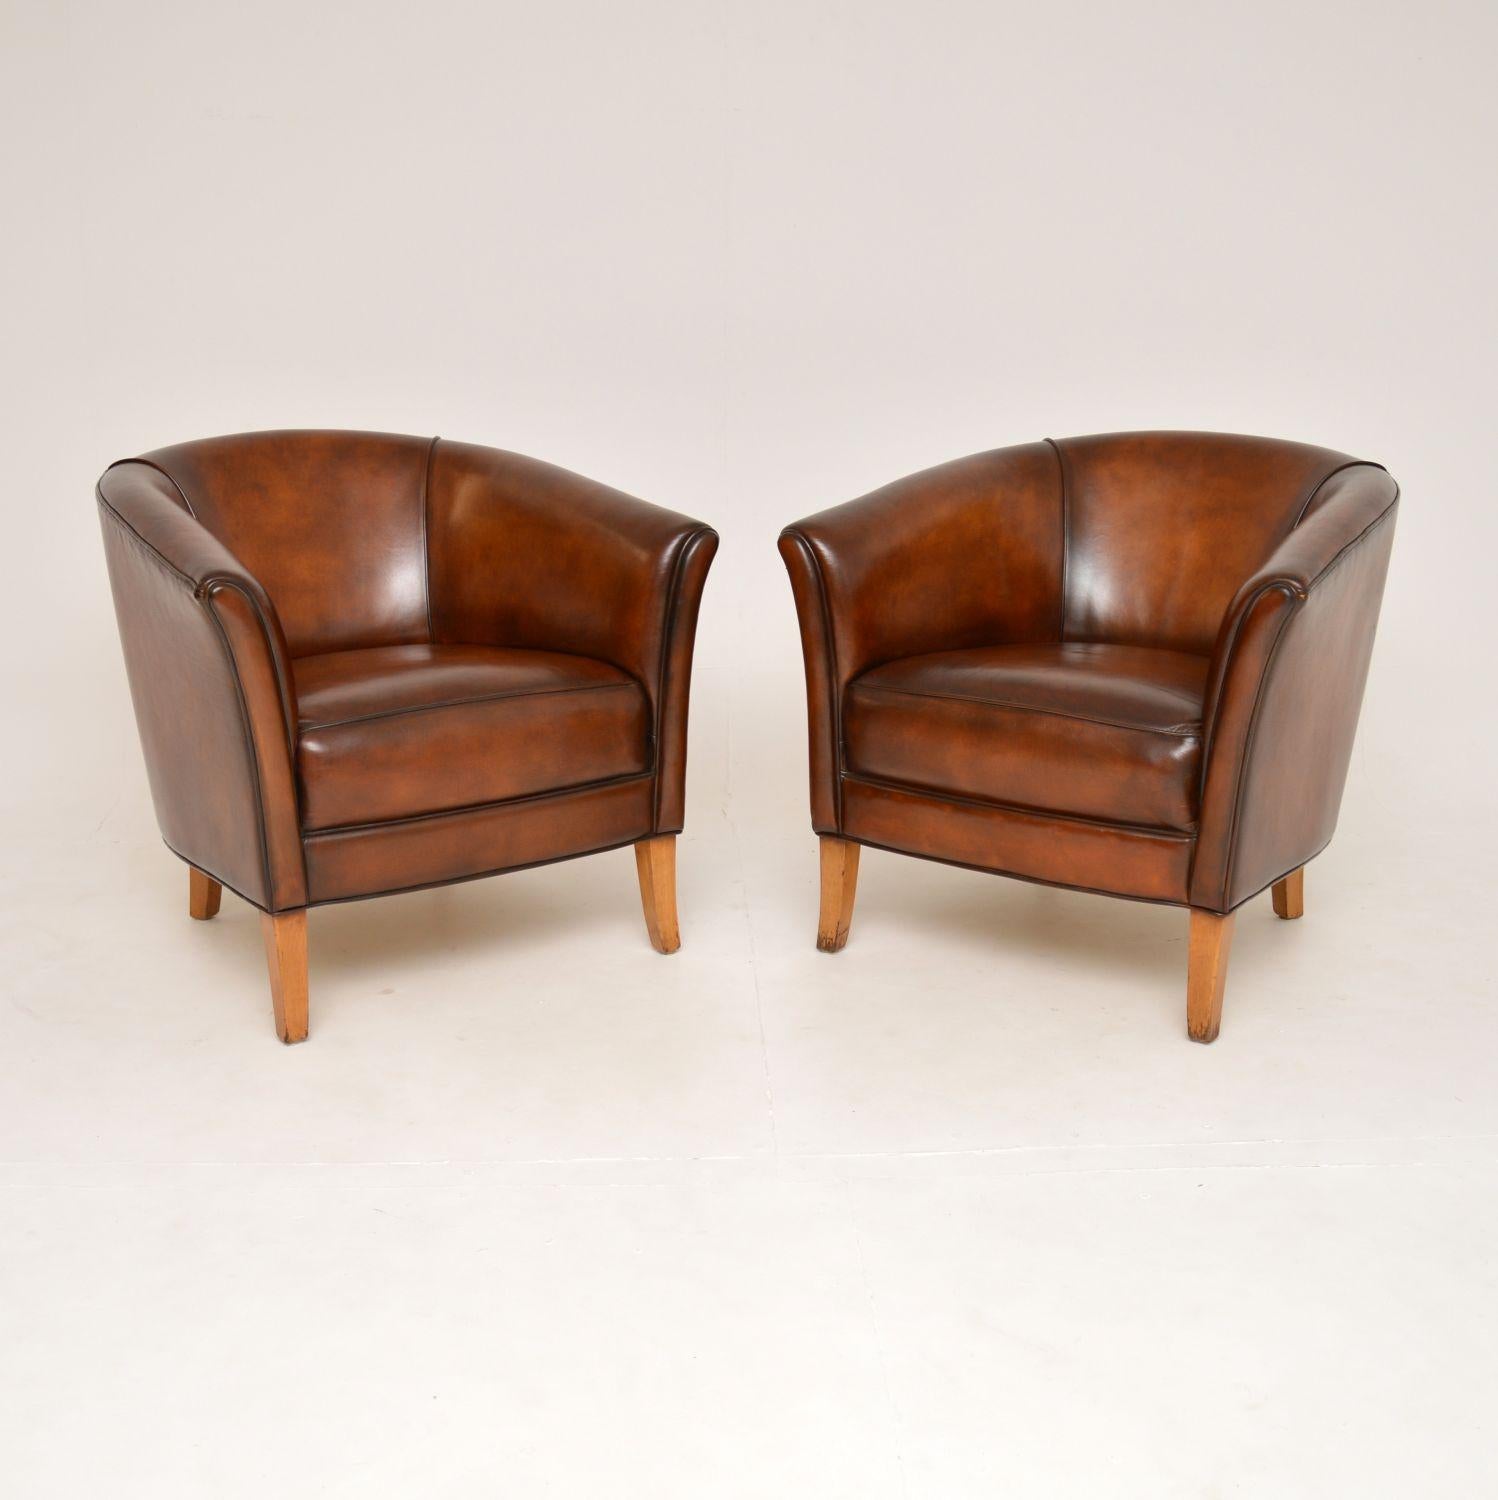 A superb pair of vintage leather club armchairs, they were recently imported from Sweden and date from around the 1960’s.

The quality is superb, they are very generous in proportion and extremely comfortable.

We have had the leather